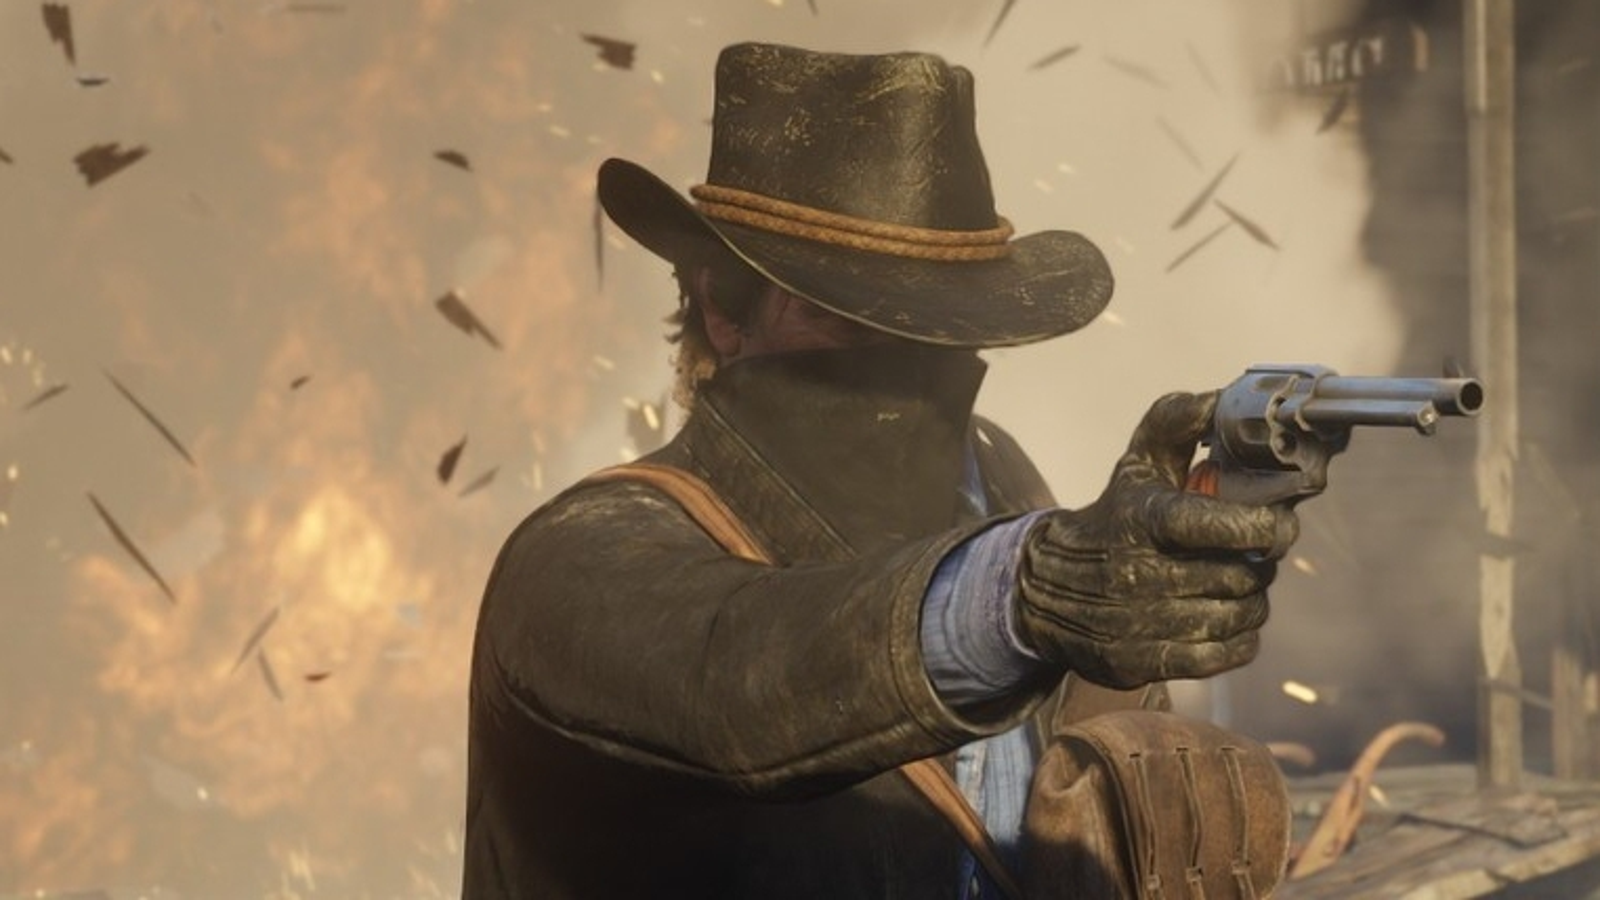 Red Dead Redemption 2 PC Review: Part 1 - PC Port Analysis